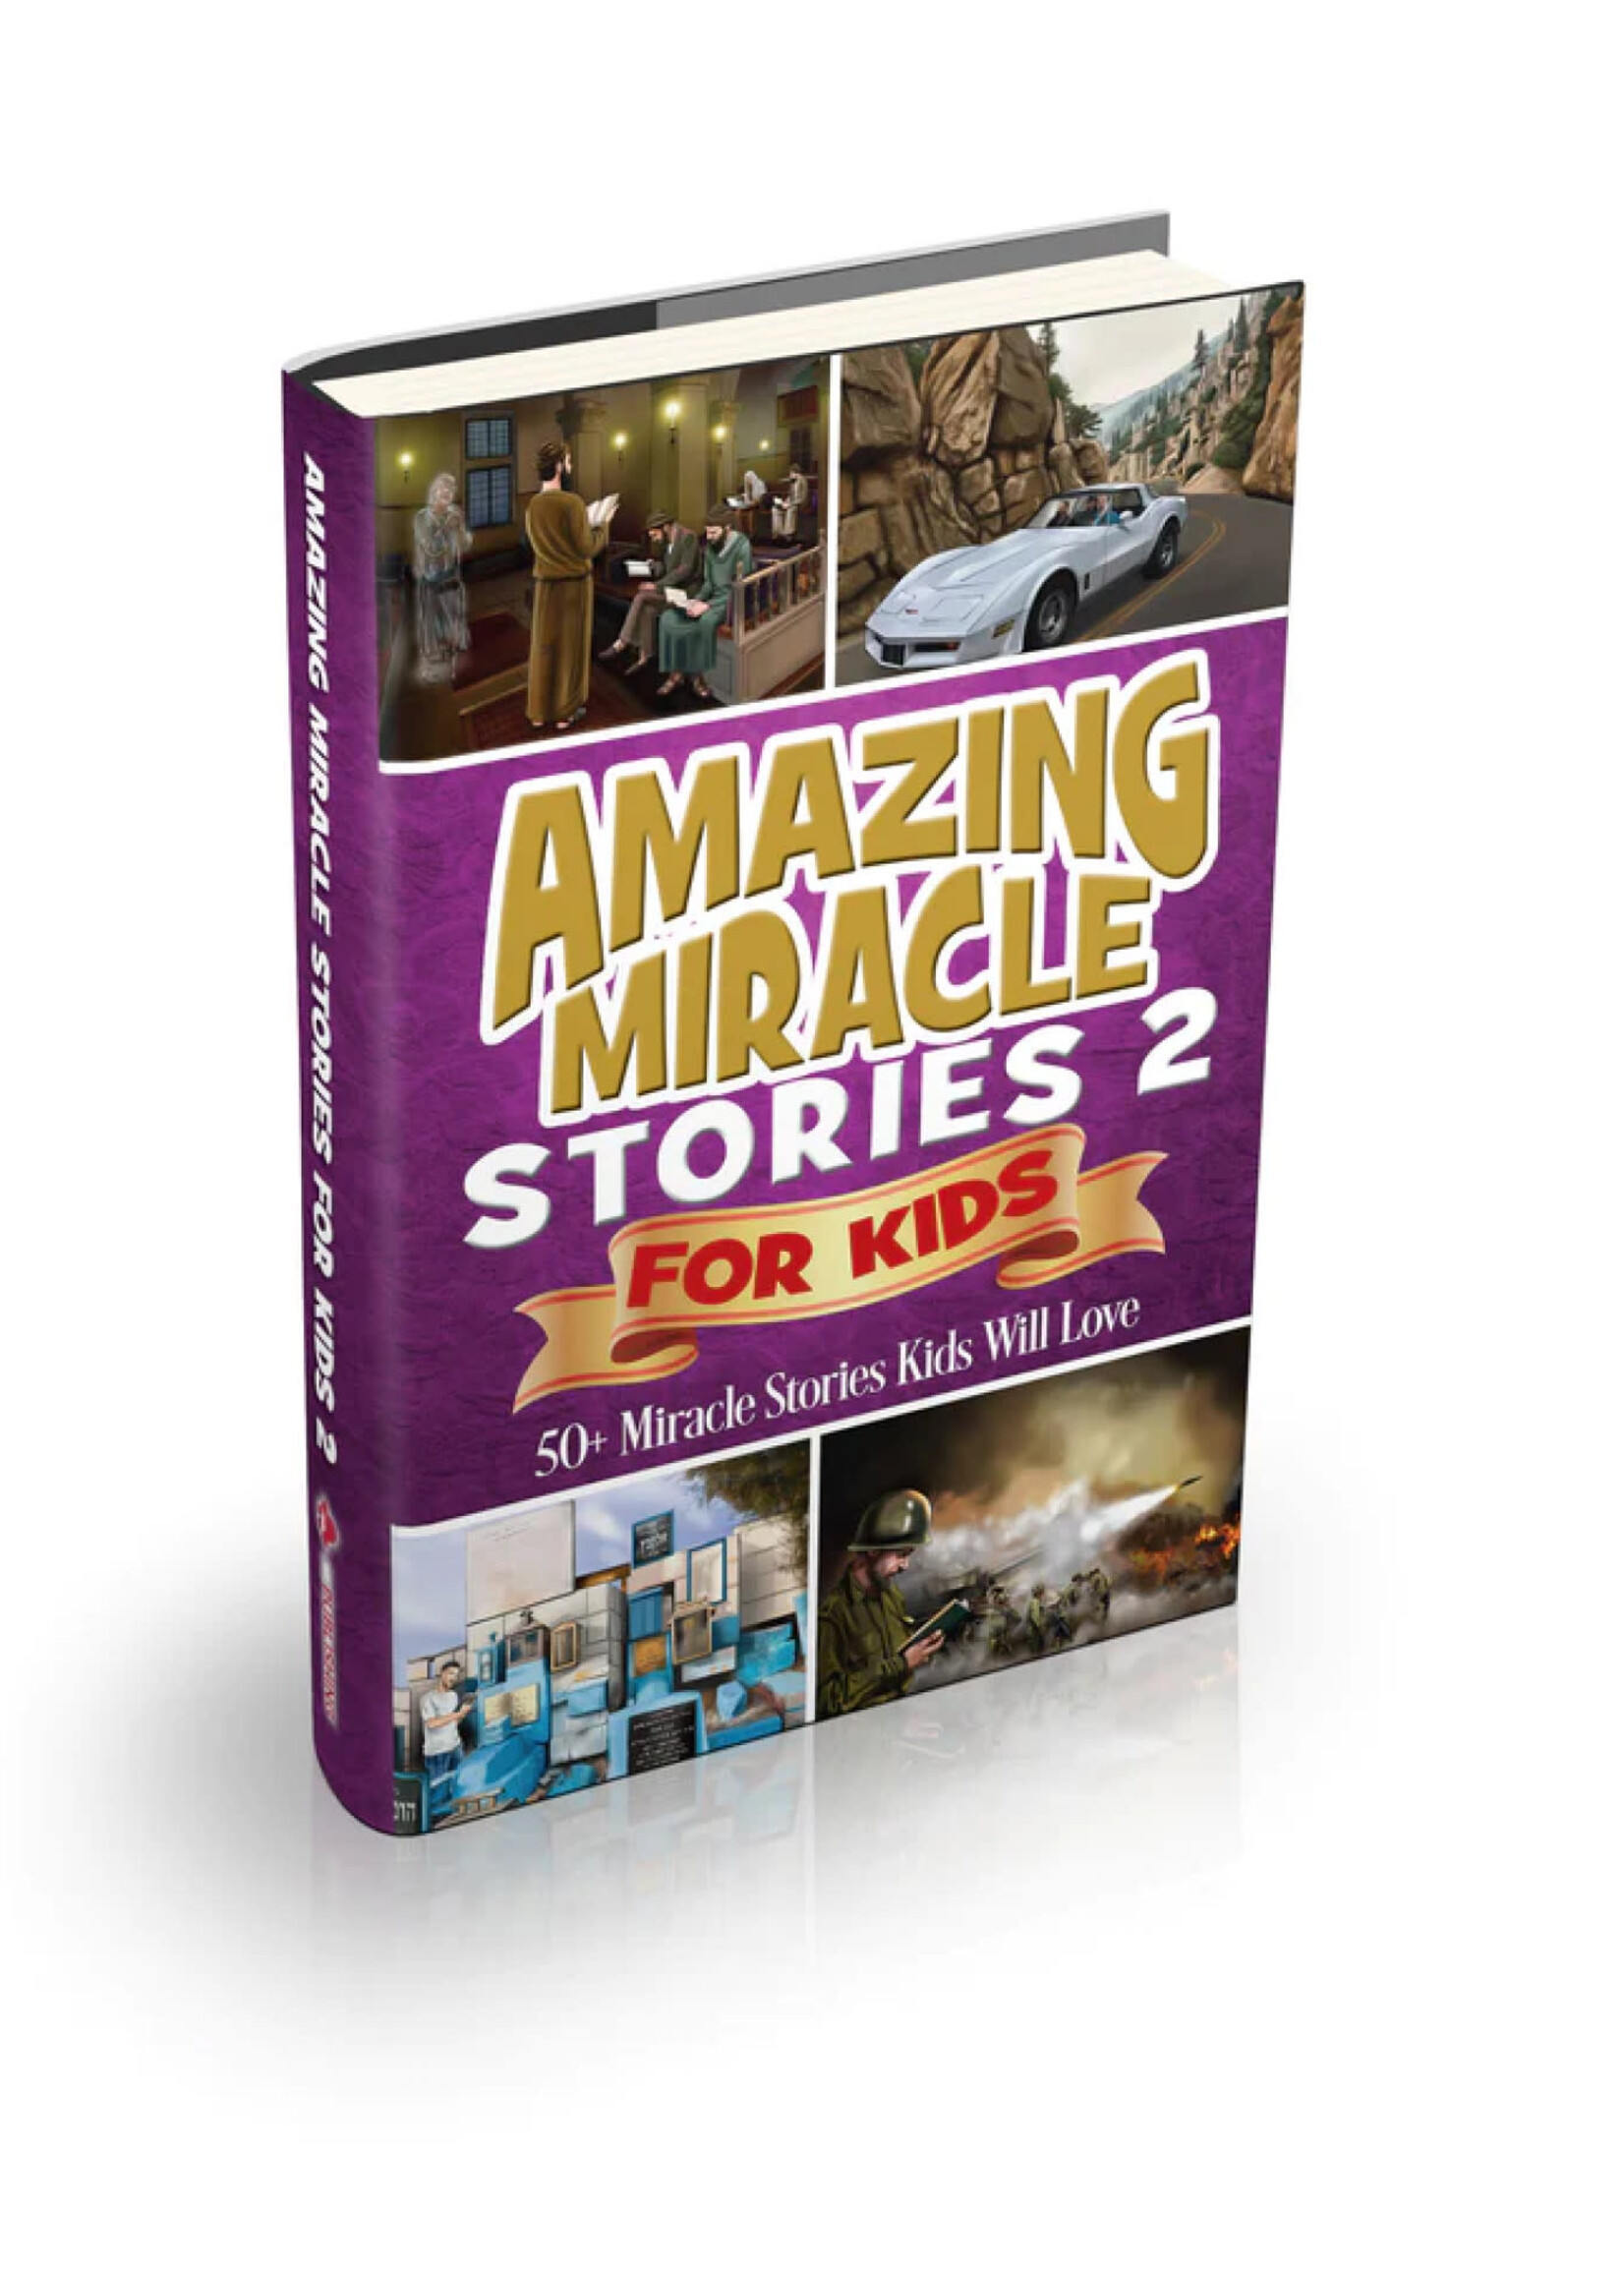 Amazing Miracle Stories for Kids #2